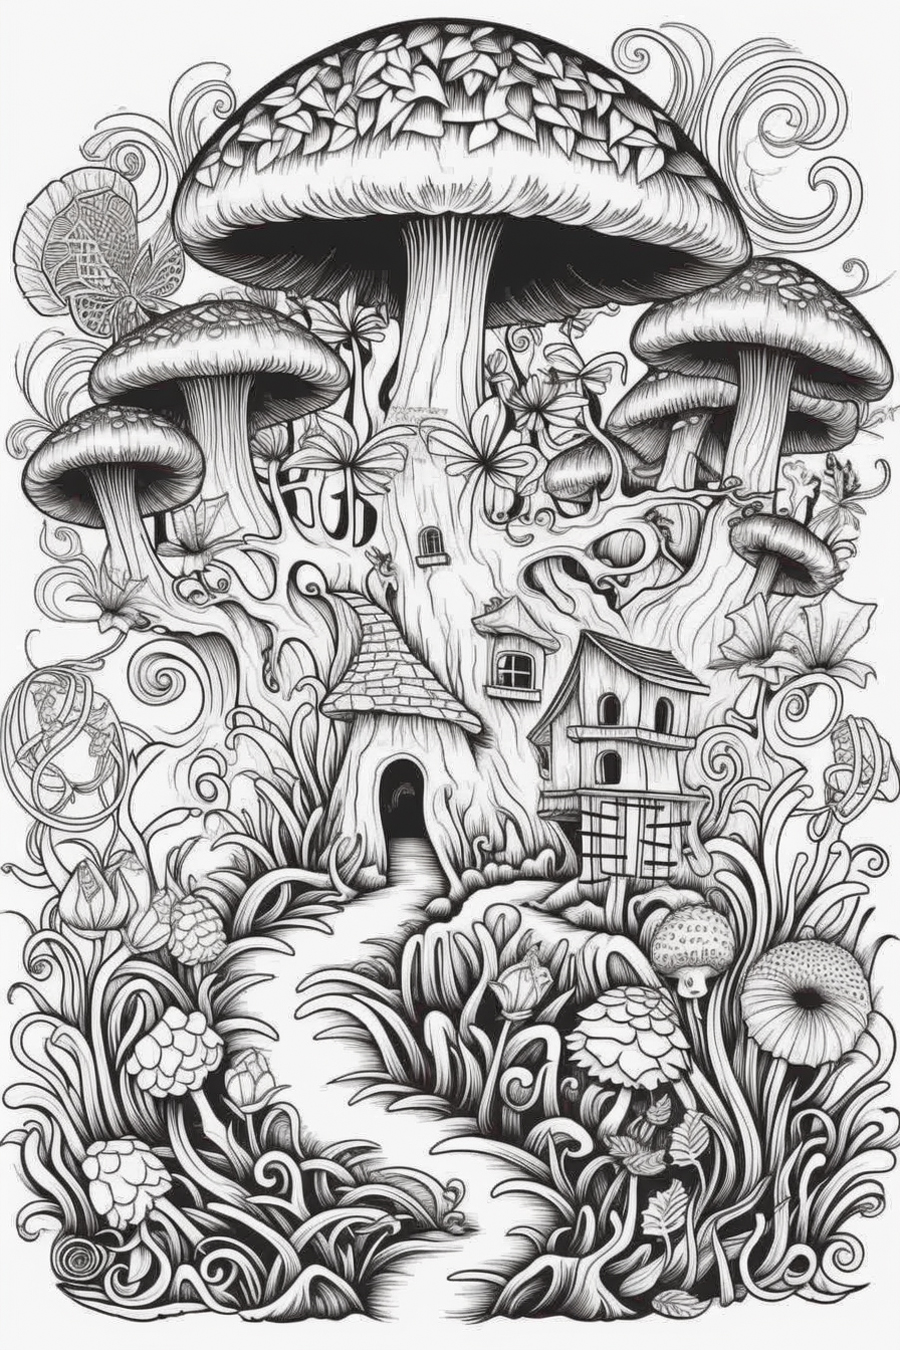 A drawing of a tree house and mushrooms.